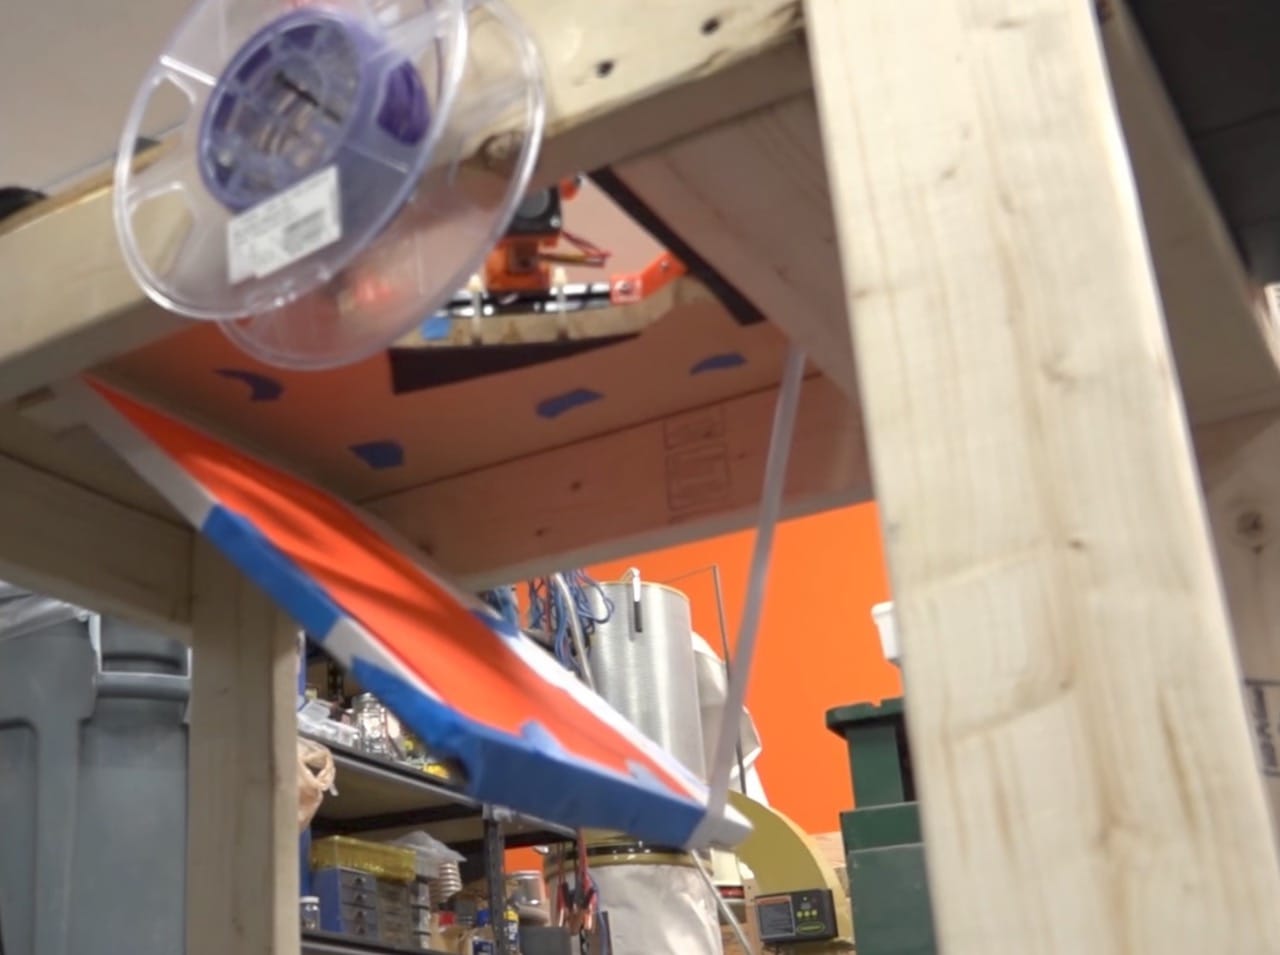  The open trap door allows the 3D print to fall into a bin below the printer 